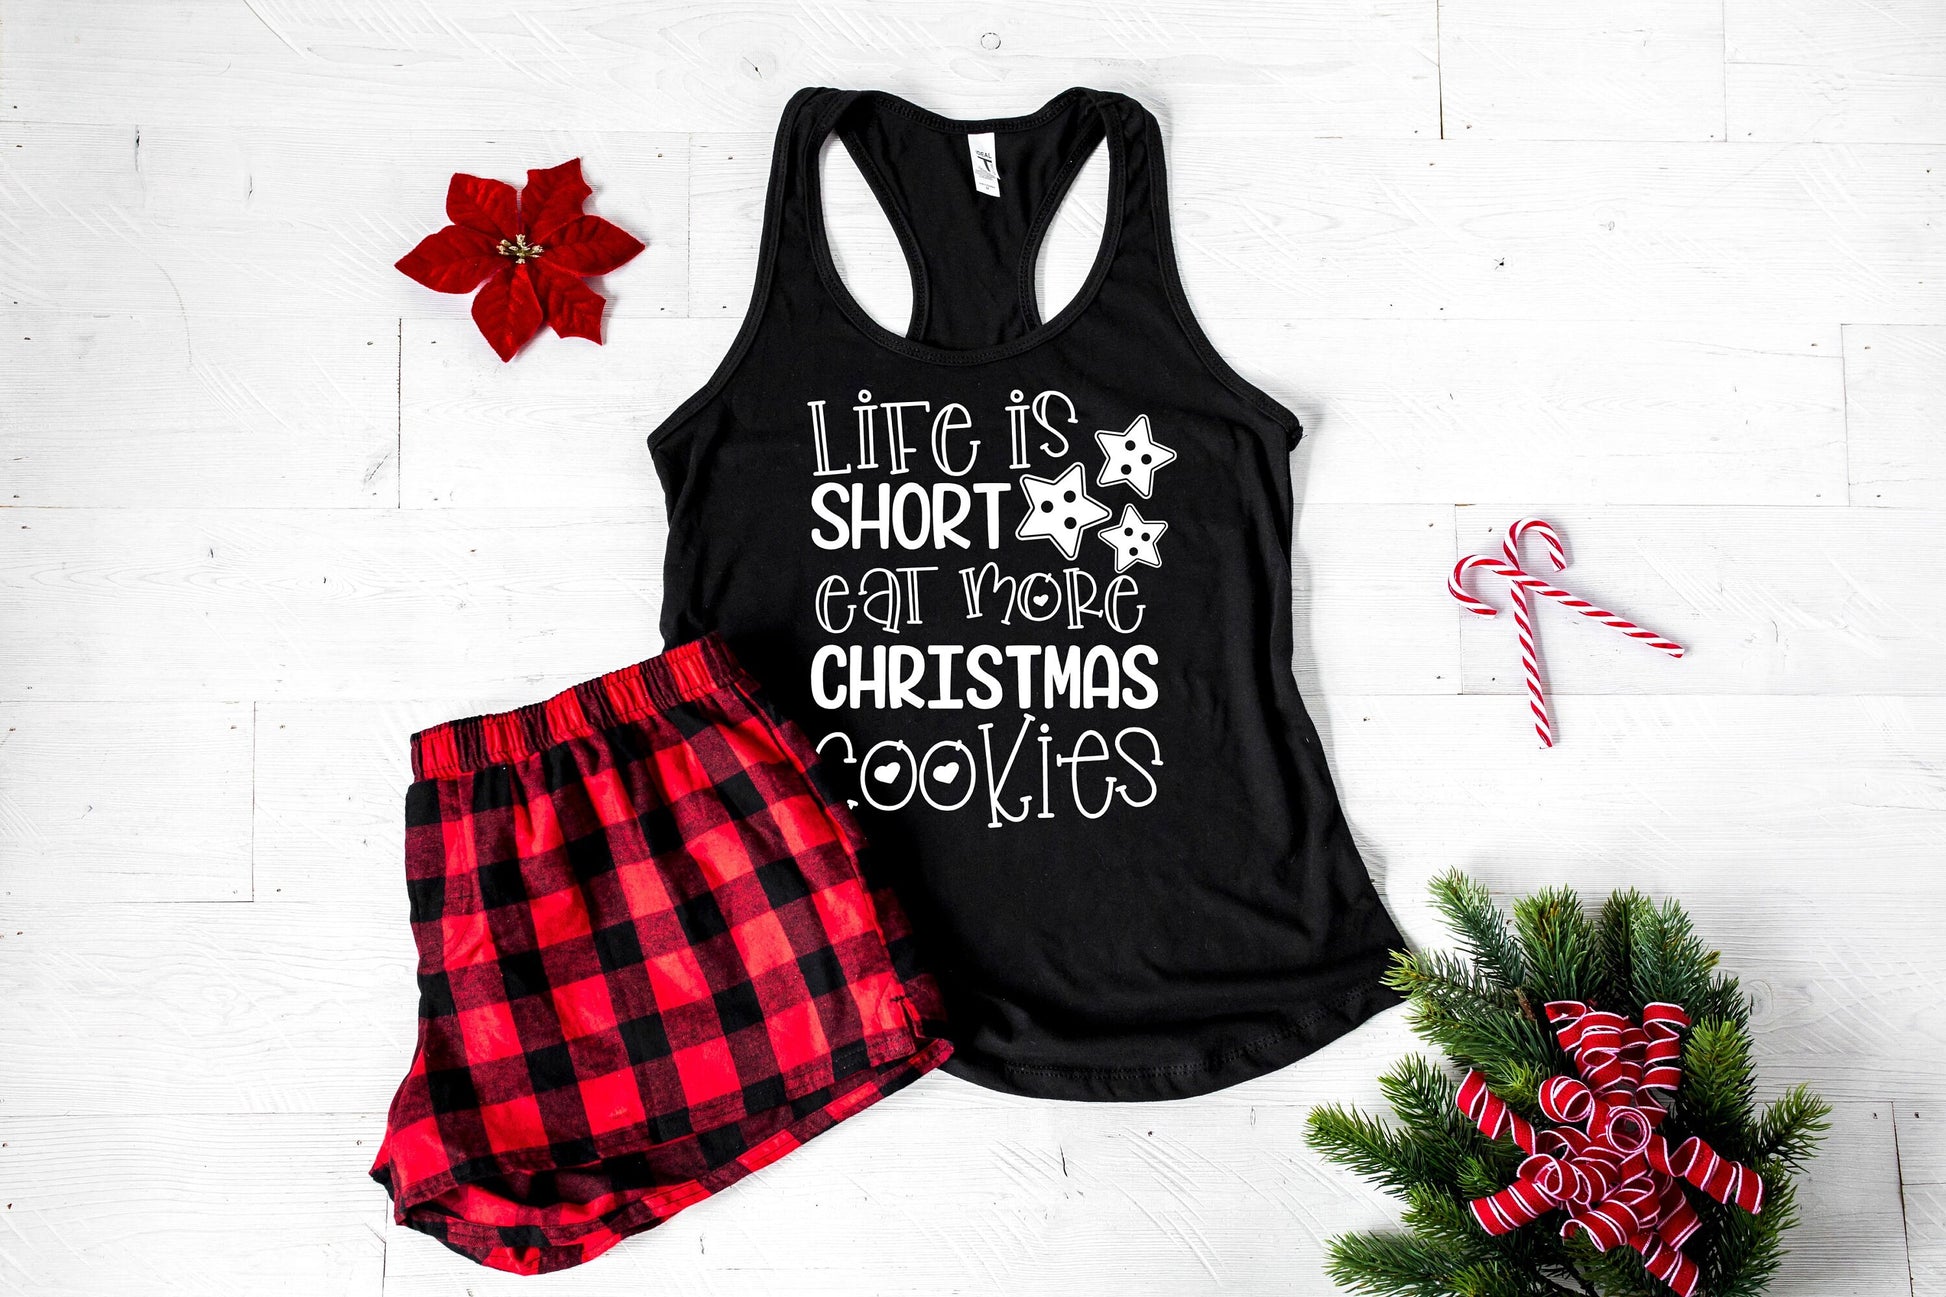 Life is Short Eat More Christmas Cookies Women's Christmas Pajamas - women's christmas jammies - buffalo plaid flannel pajamas